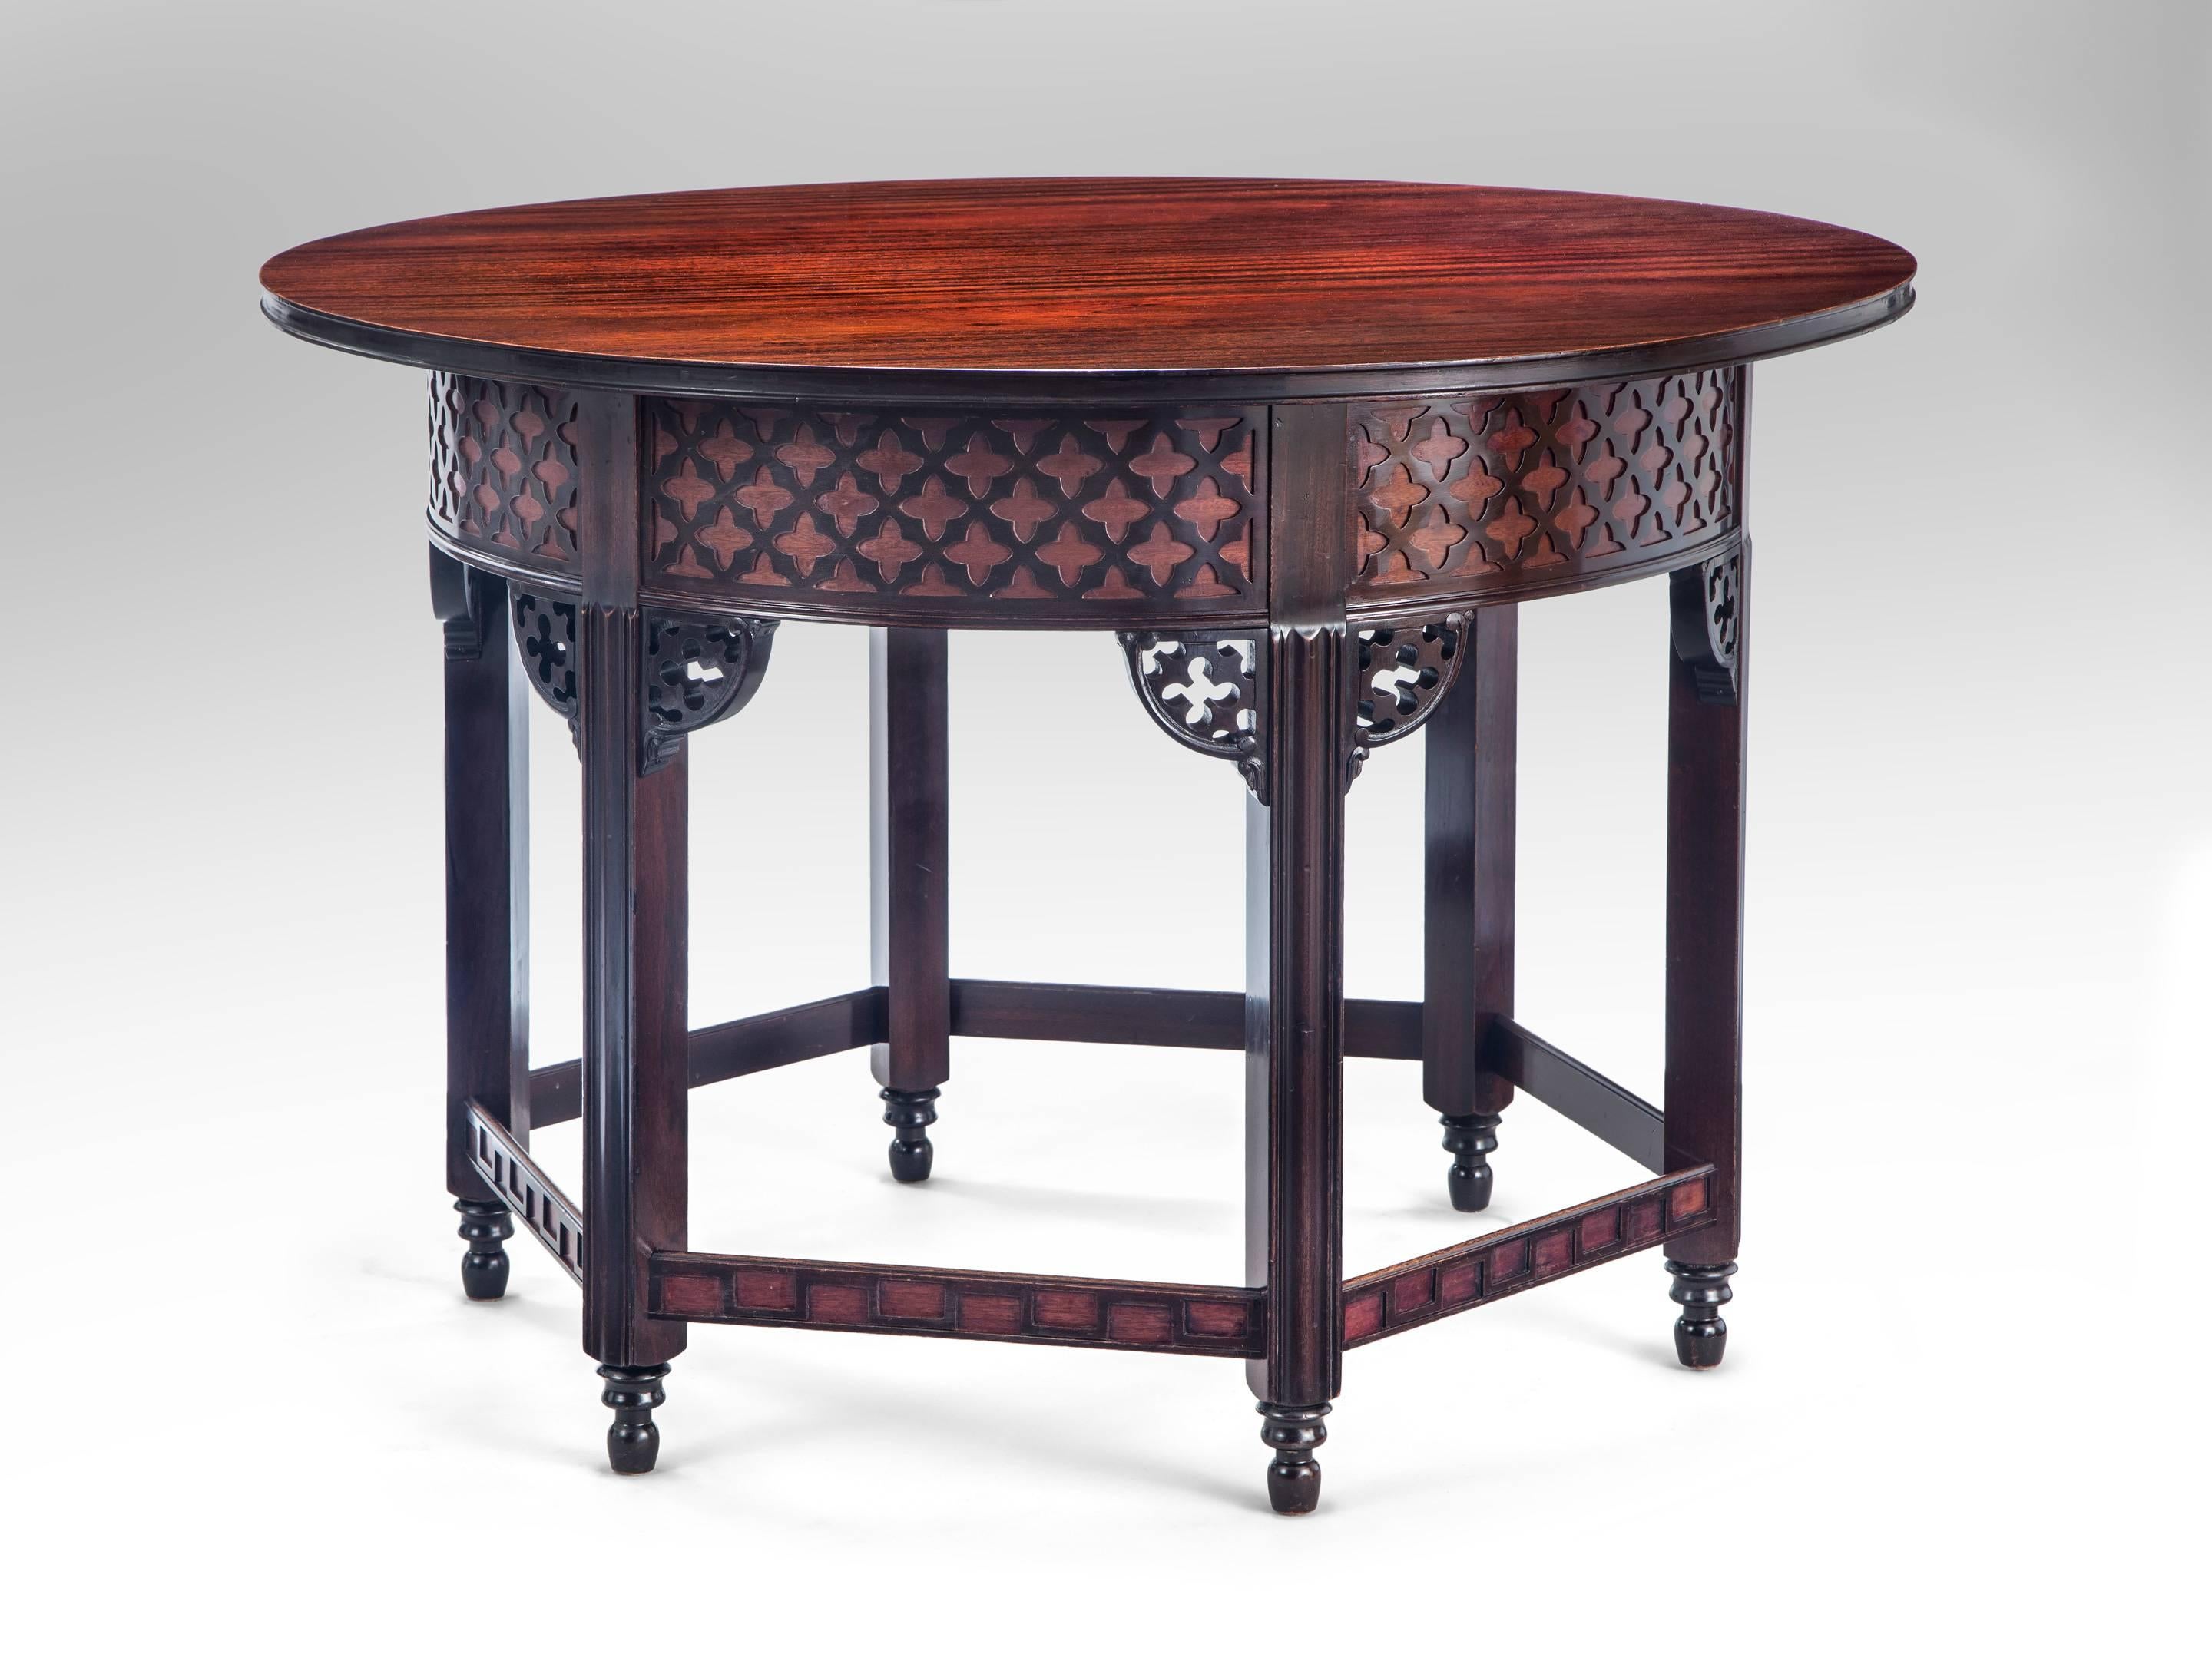 The circular mahogany top, above a quatrefoil latticework frieze, the six molded legs headed by pierced brackets and connected by a latticework stretcher, raised on turned feet. 
Marked on the reverse of top: Hantverks och